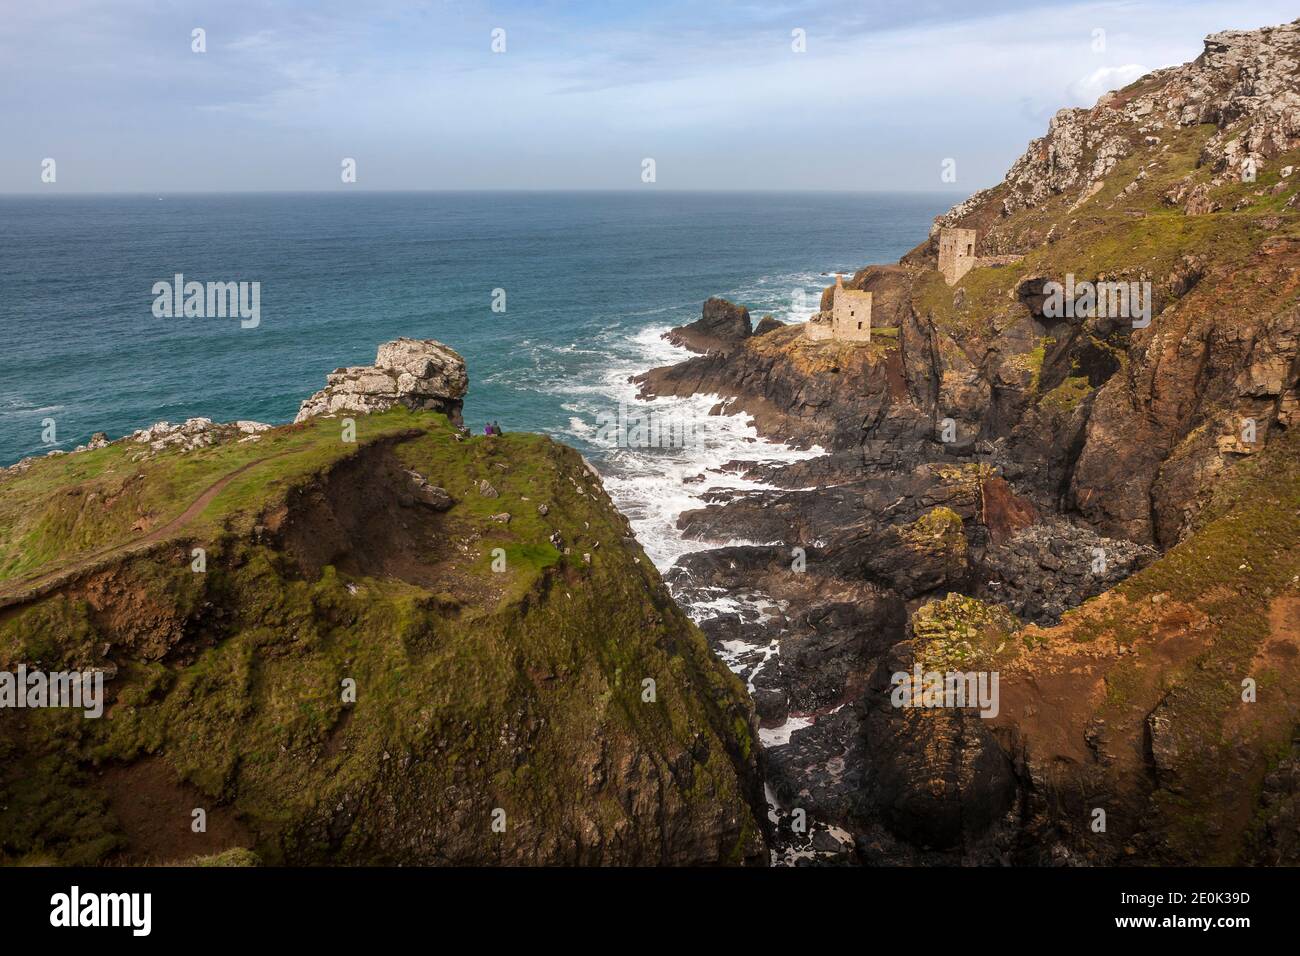 The famed ruins of the Crowns engine houses on the wild Tin Coast: Botallack Mine, St Just, Cornwall, UK. Cornish Mining World Heritage Site. Stock Photo